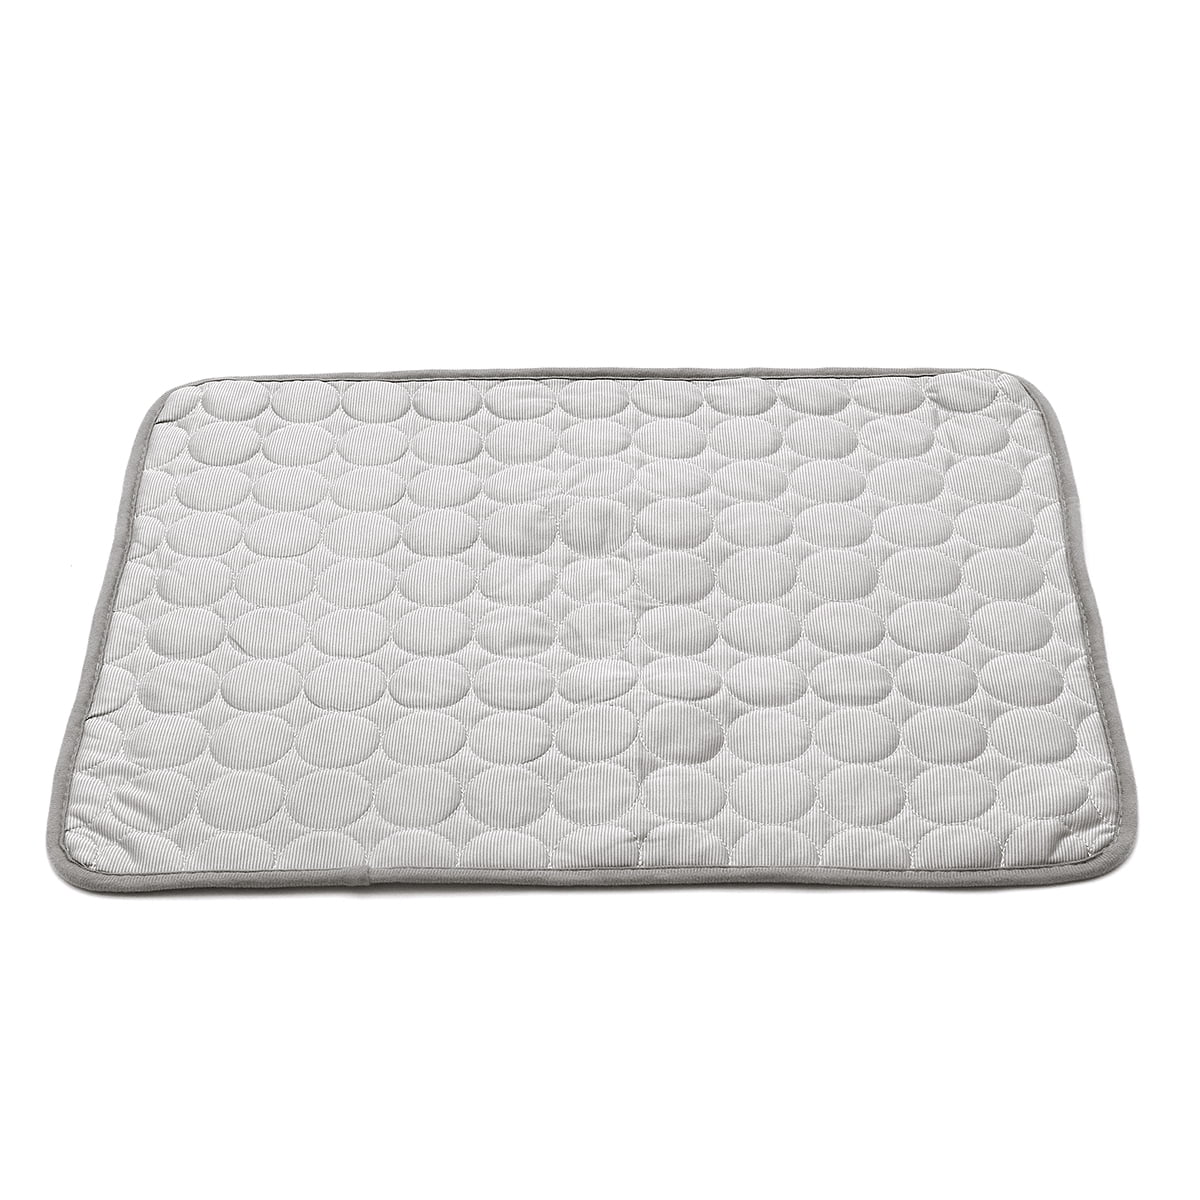 Cooling Mat - Soft Gel Pad for Dogs, Cats, Pets, Couches ...